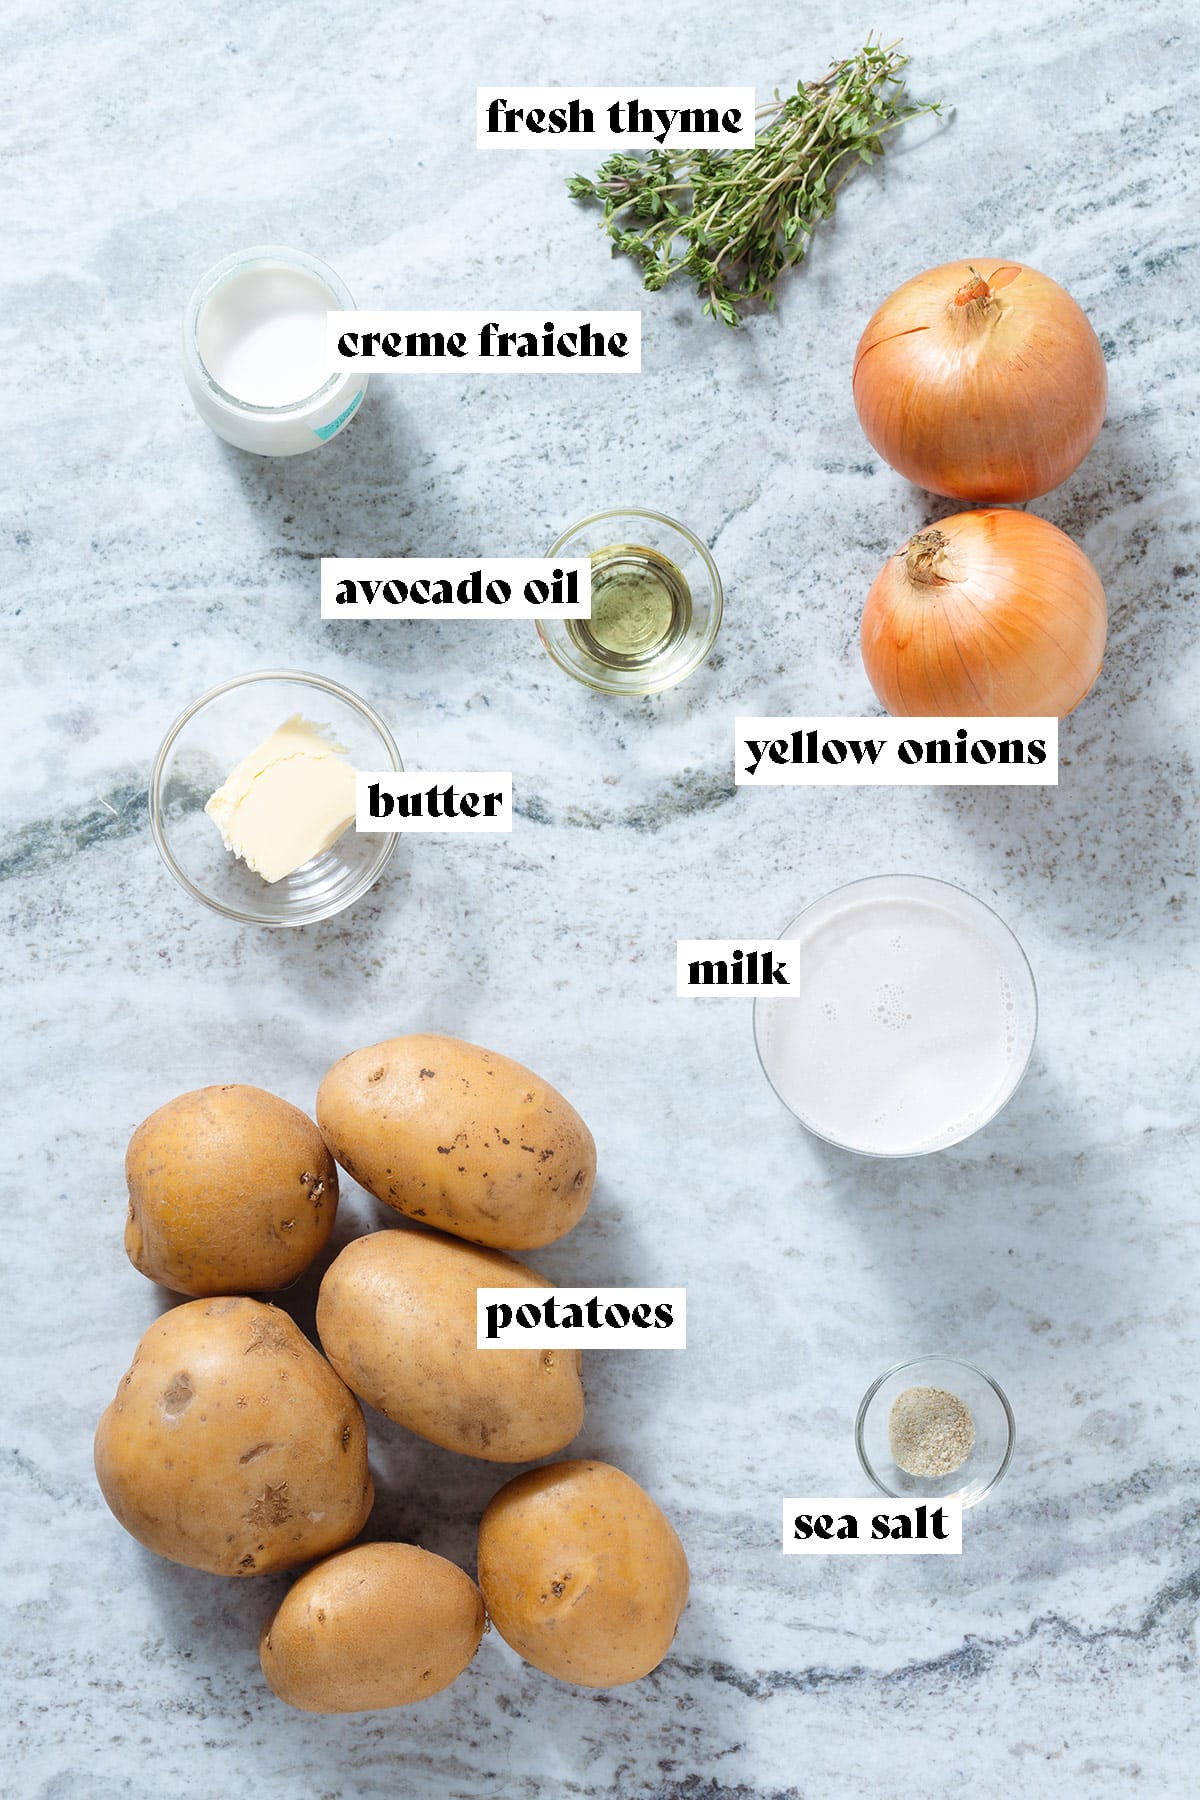 Potatoes, yellow onions, milk, creme fraiche, butter, milk, and other ingredients laid out on a grey stone background with text overlay.